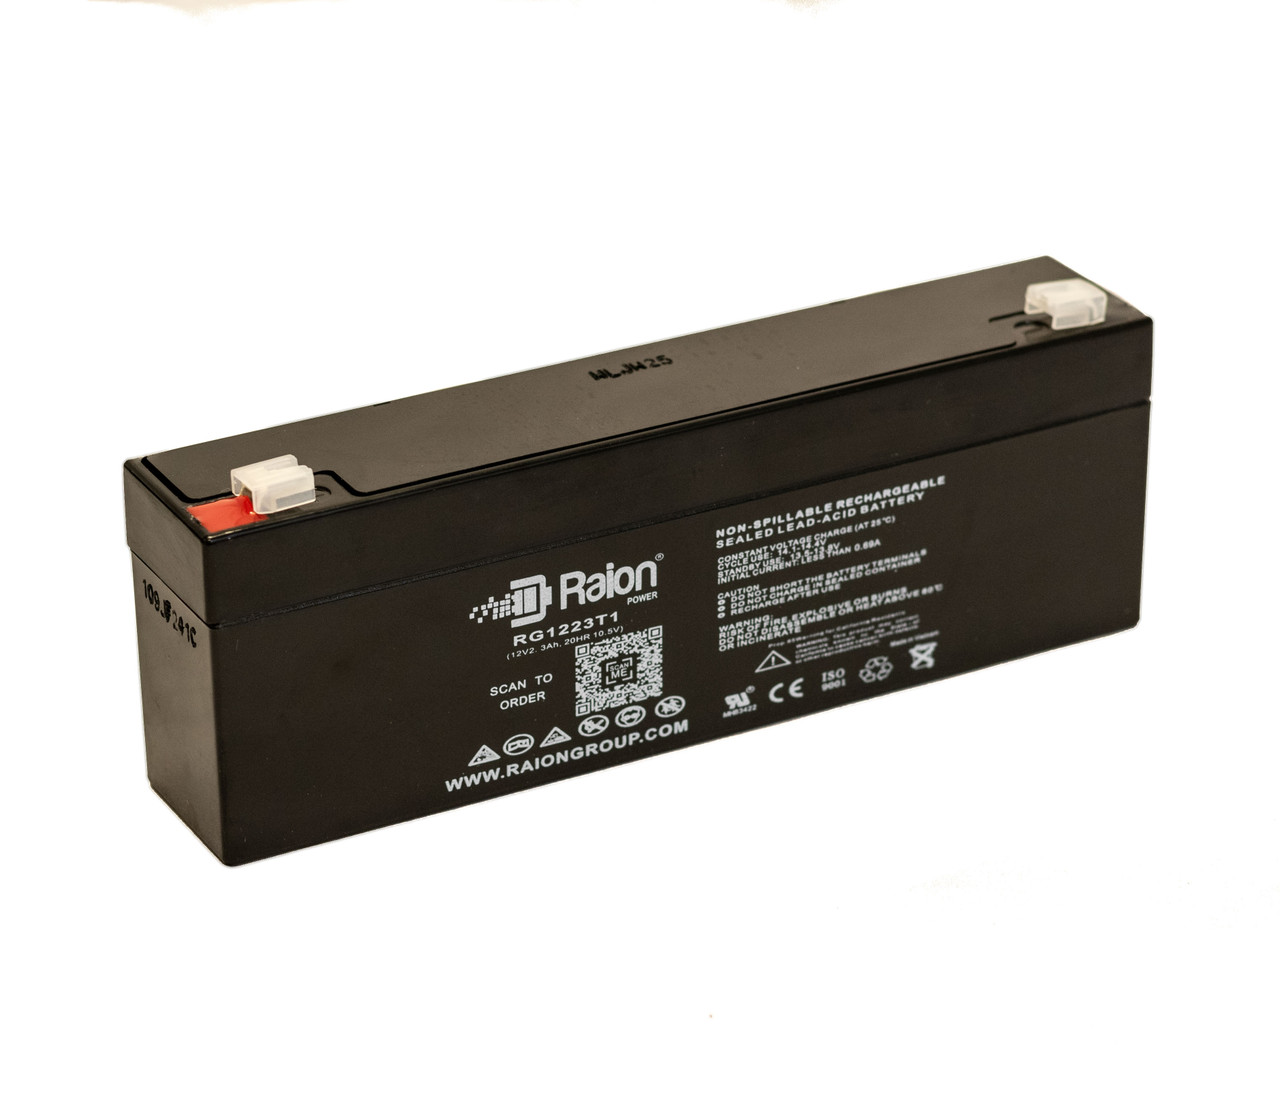 Raion Power RG1223T1 Replacement Battery for Fluke Biomedical Corp 4000